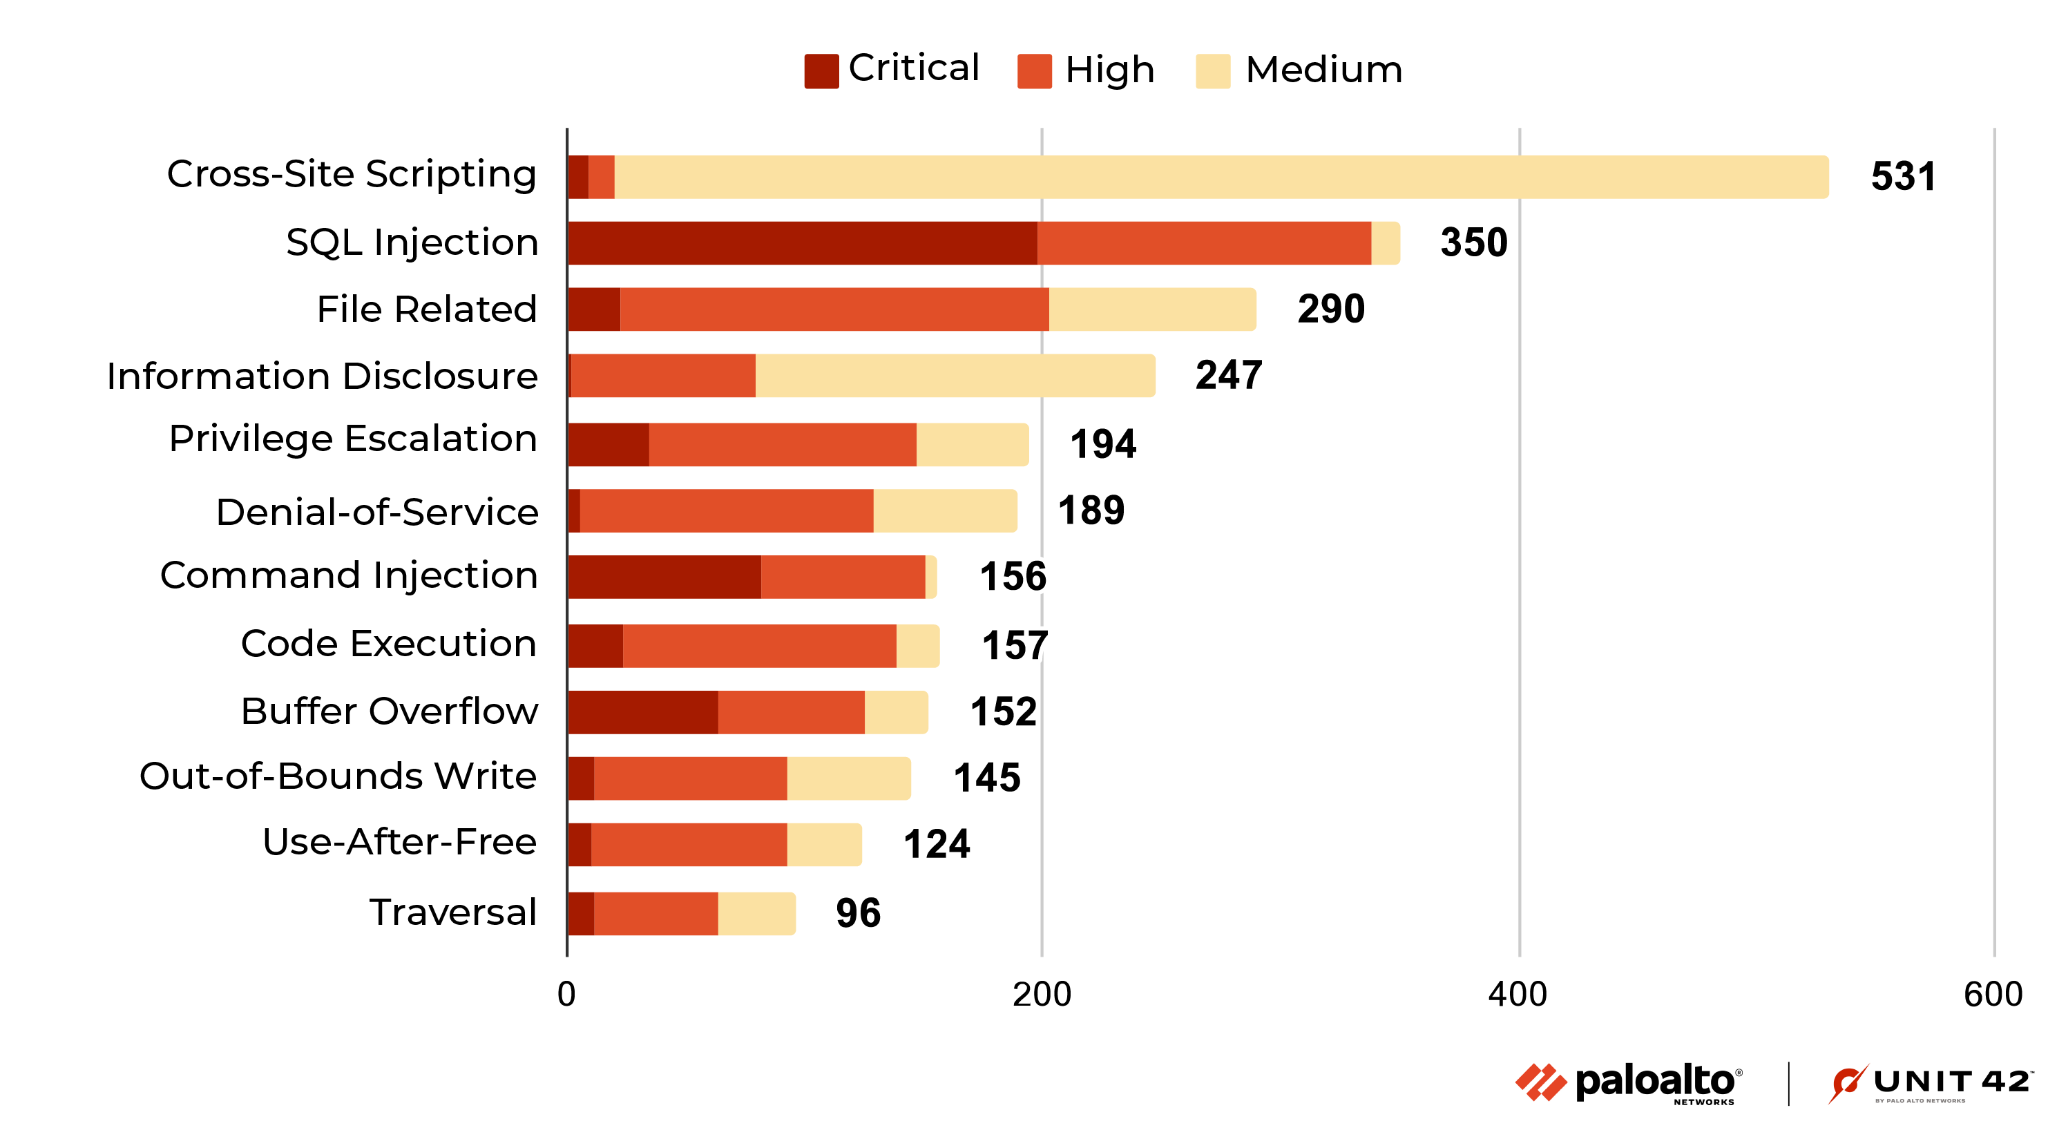 Image 2 is a stacked bar chart showing the vulnerability category distribution for CVEs registered through August and September of 2022. Medium has the largest portion in yellow for cross-site scripting. 